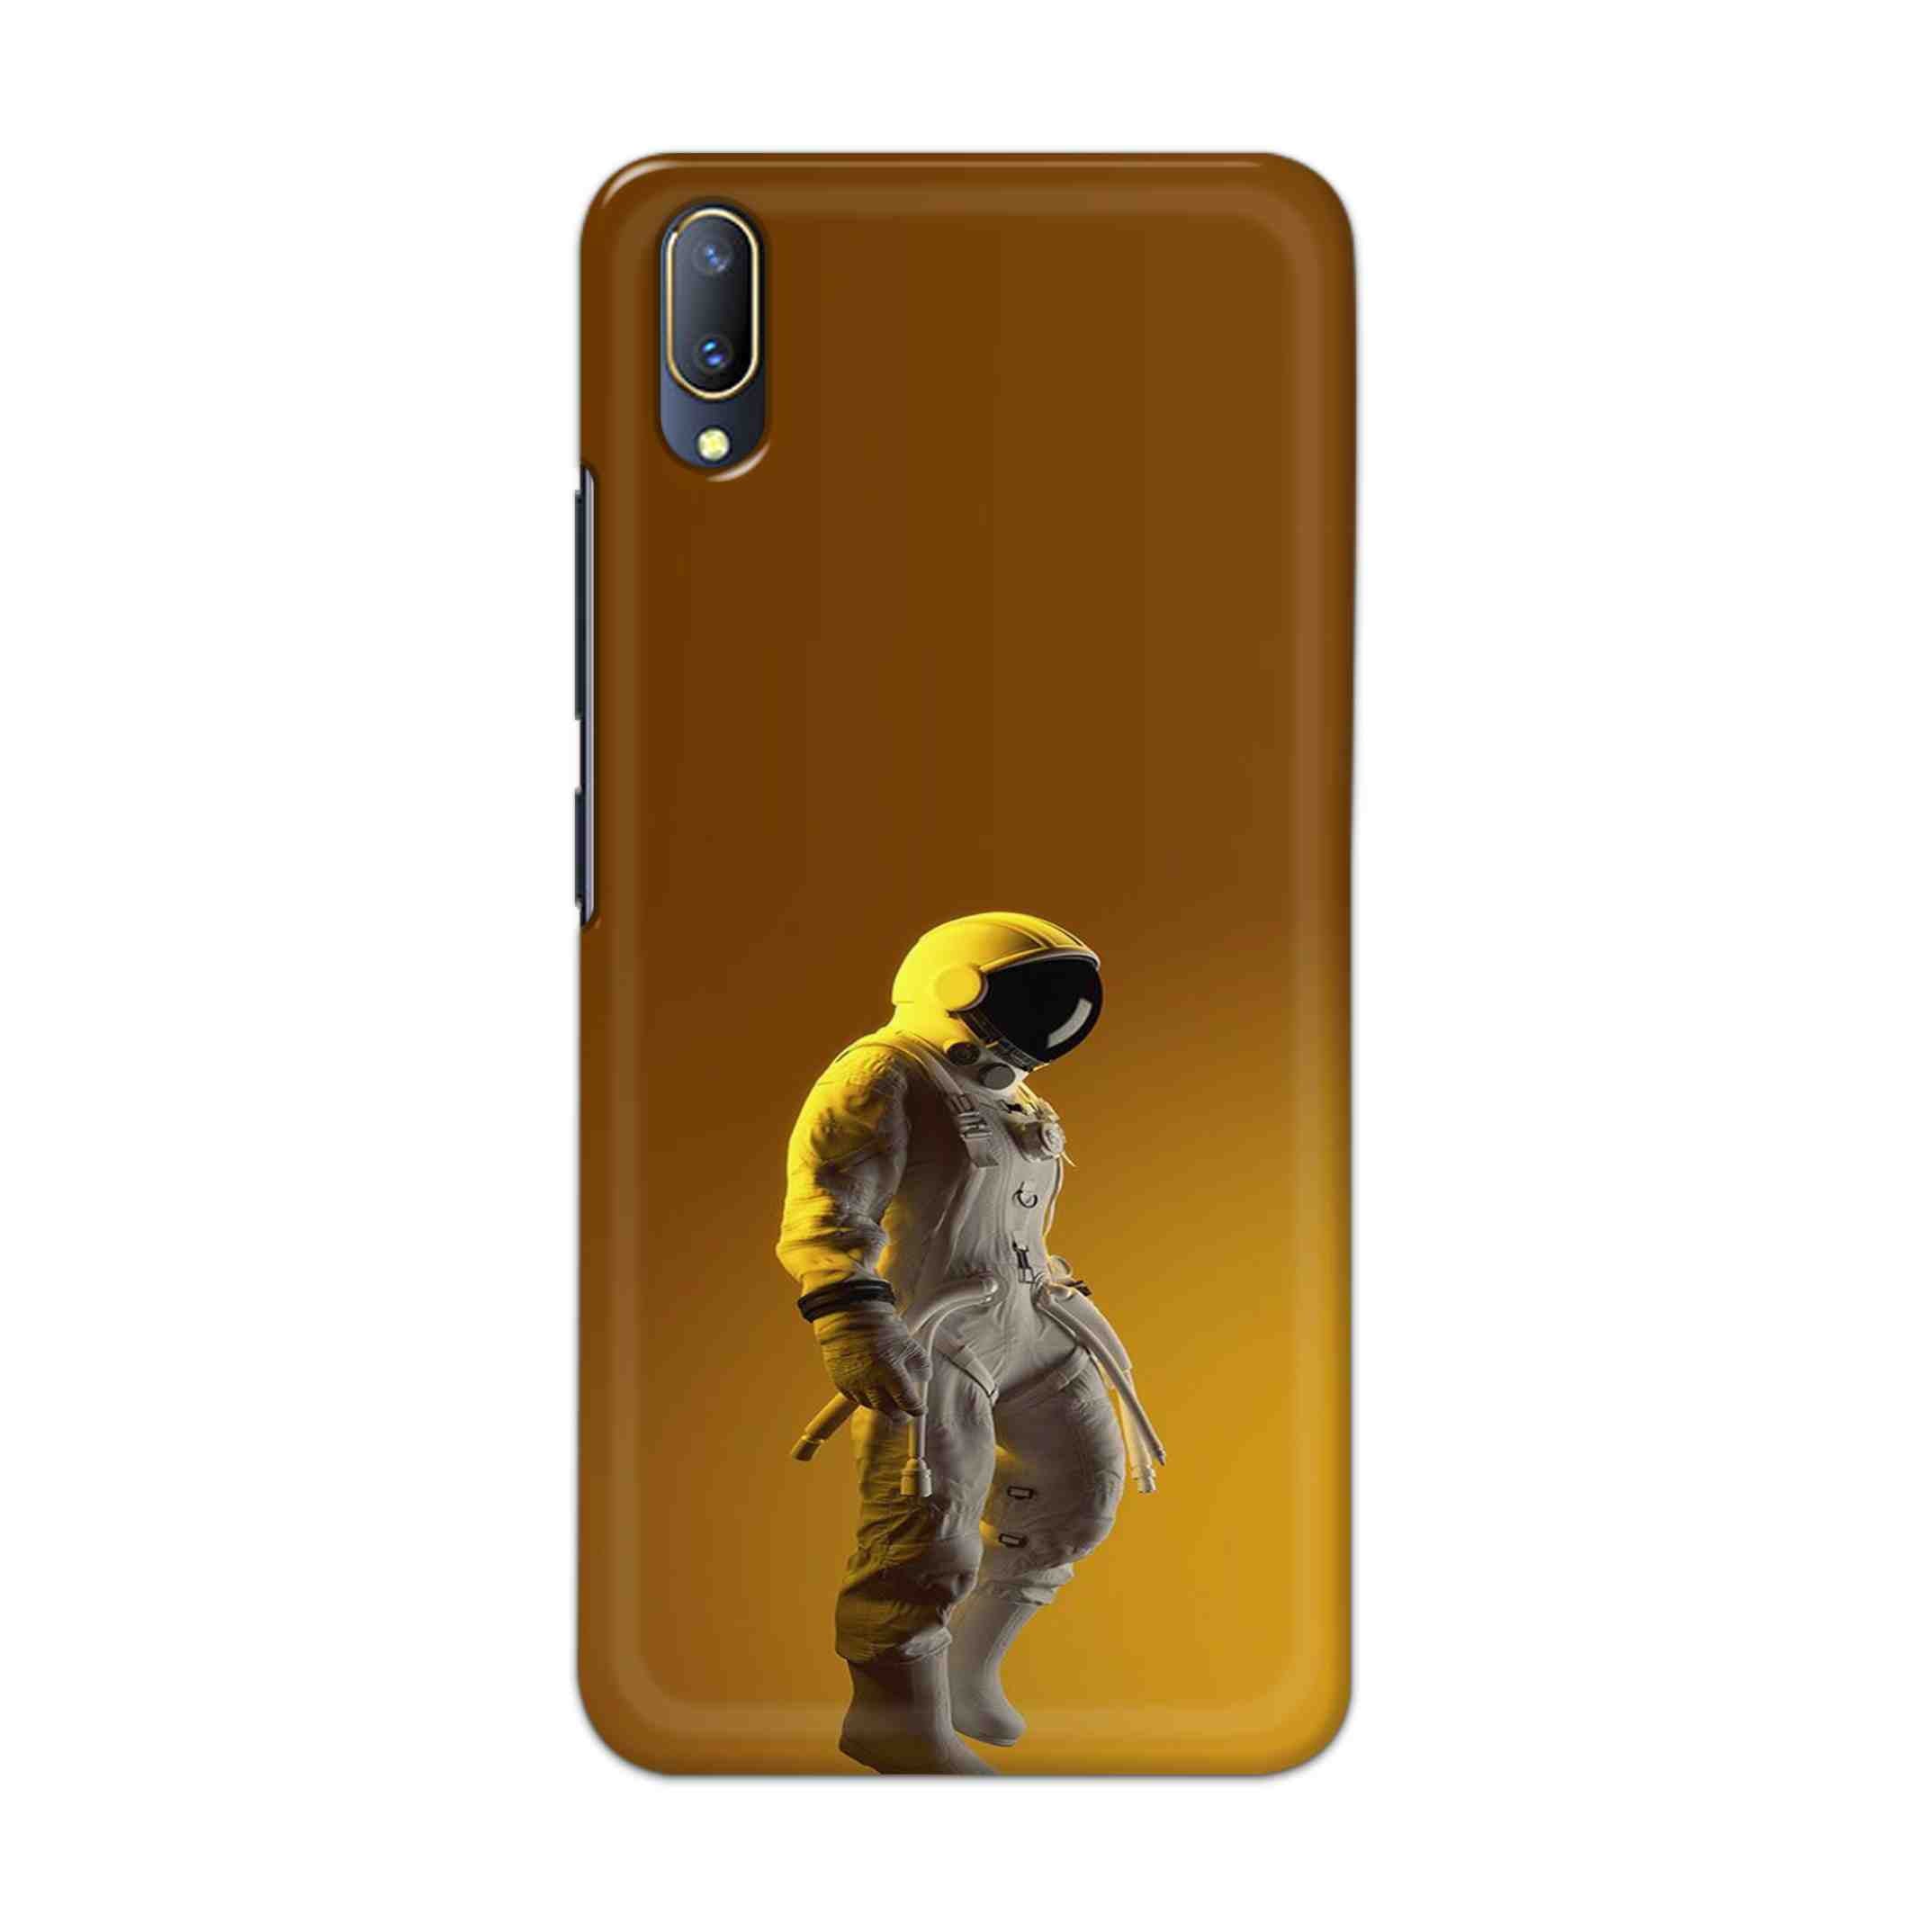 Buy Yellow Astronaut Hard Back Mobile Phone Case Cover For V11 PRO Online